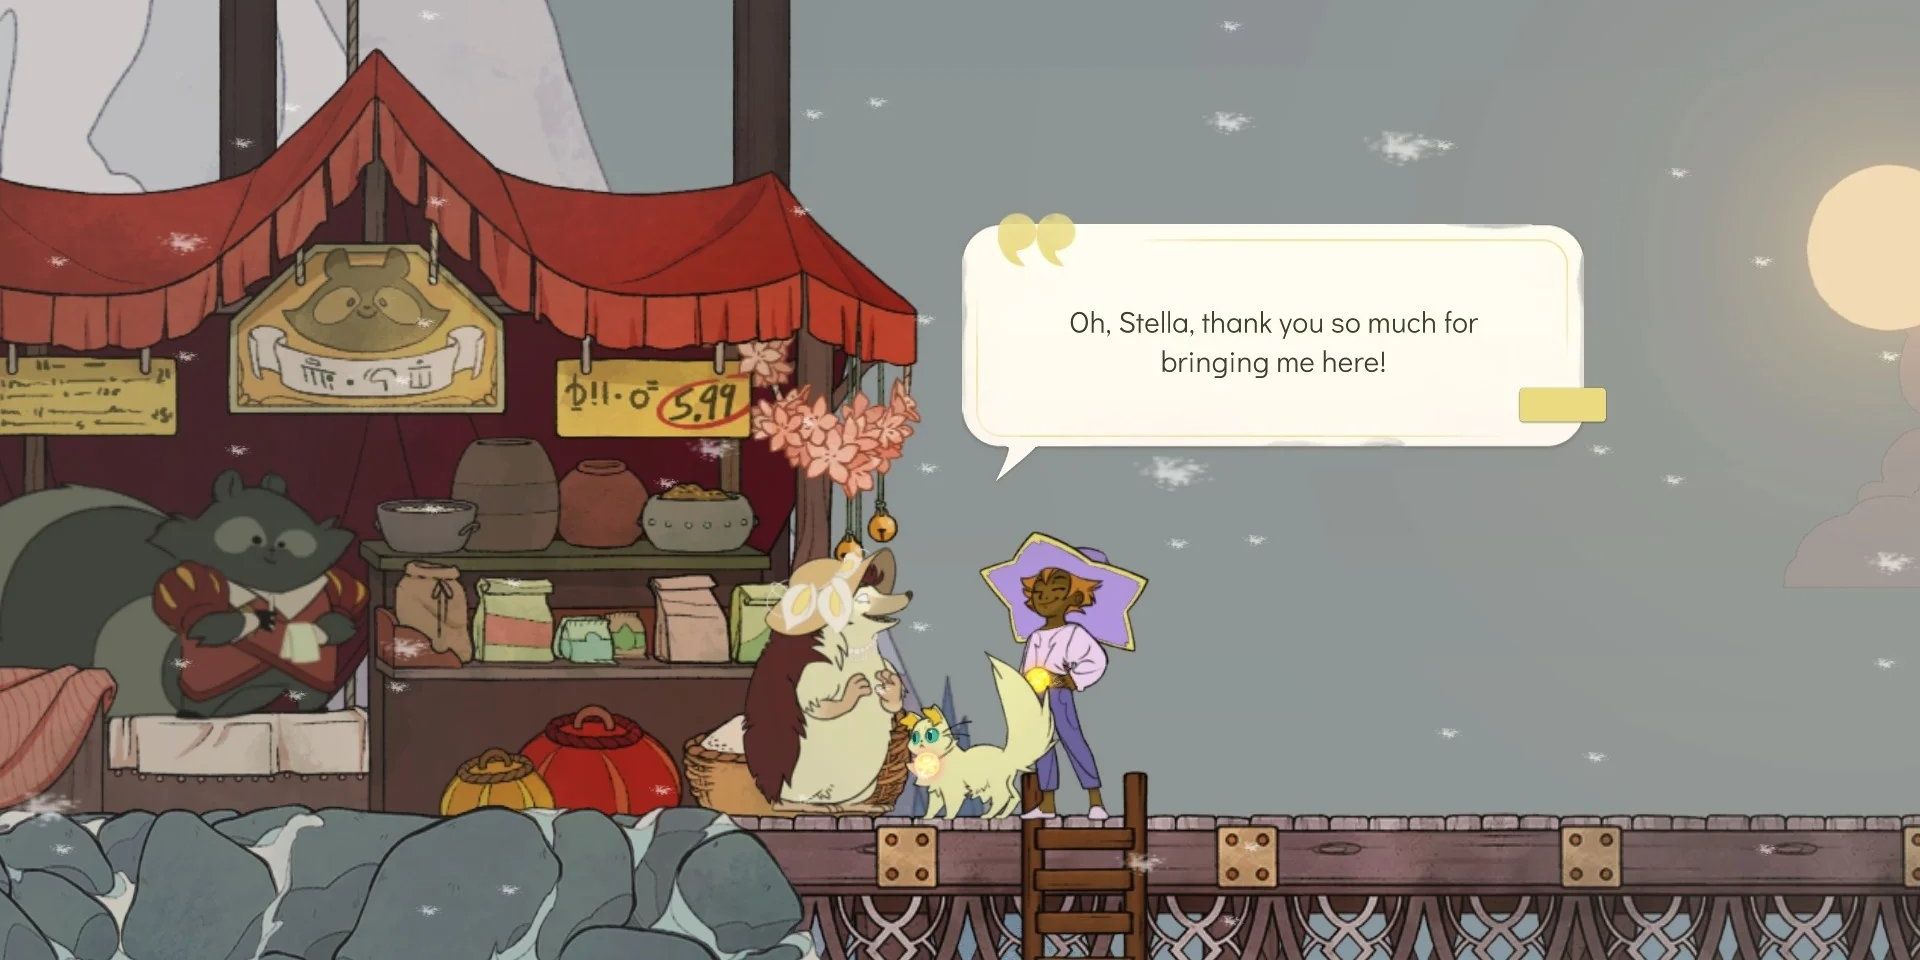 The player talking to the character Alice in front of the merchant in Nordweiler in the game Spiritfarer